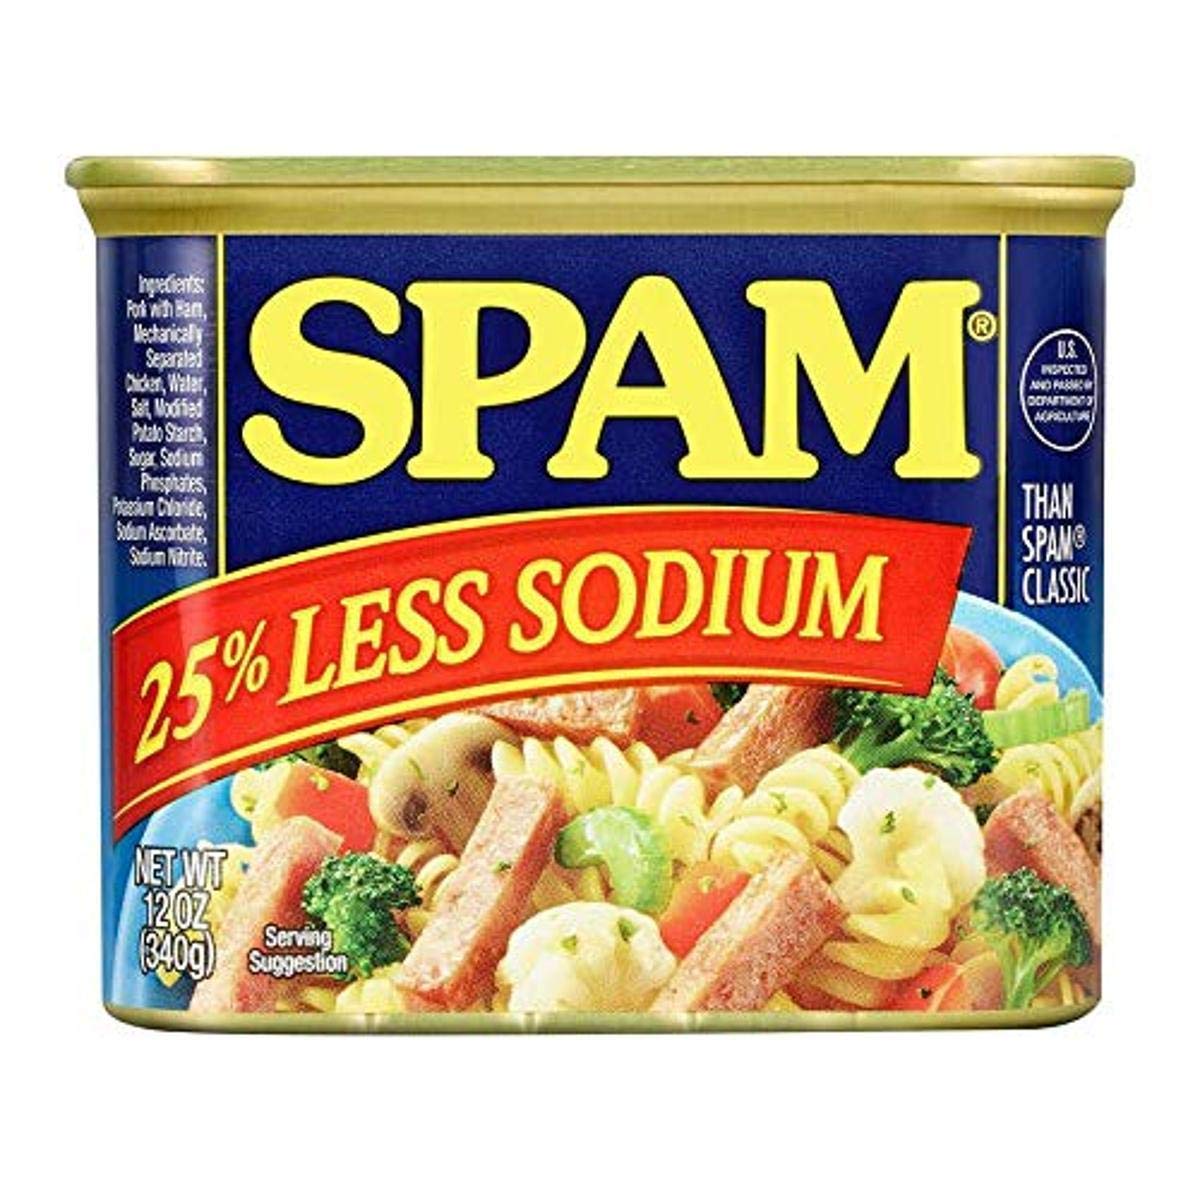 SPAM Less Sodium, 12 Oz (Pack Of 12) Less Sodium 12 Ounce (Pack of 12), Now Only $31.32